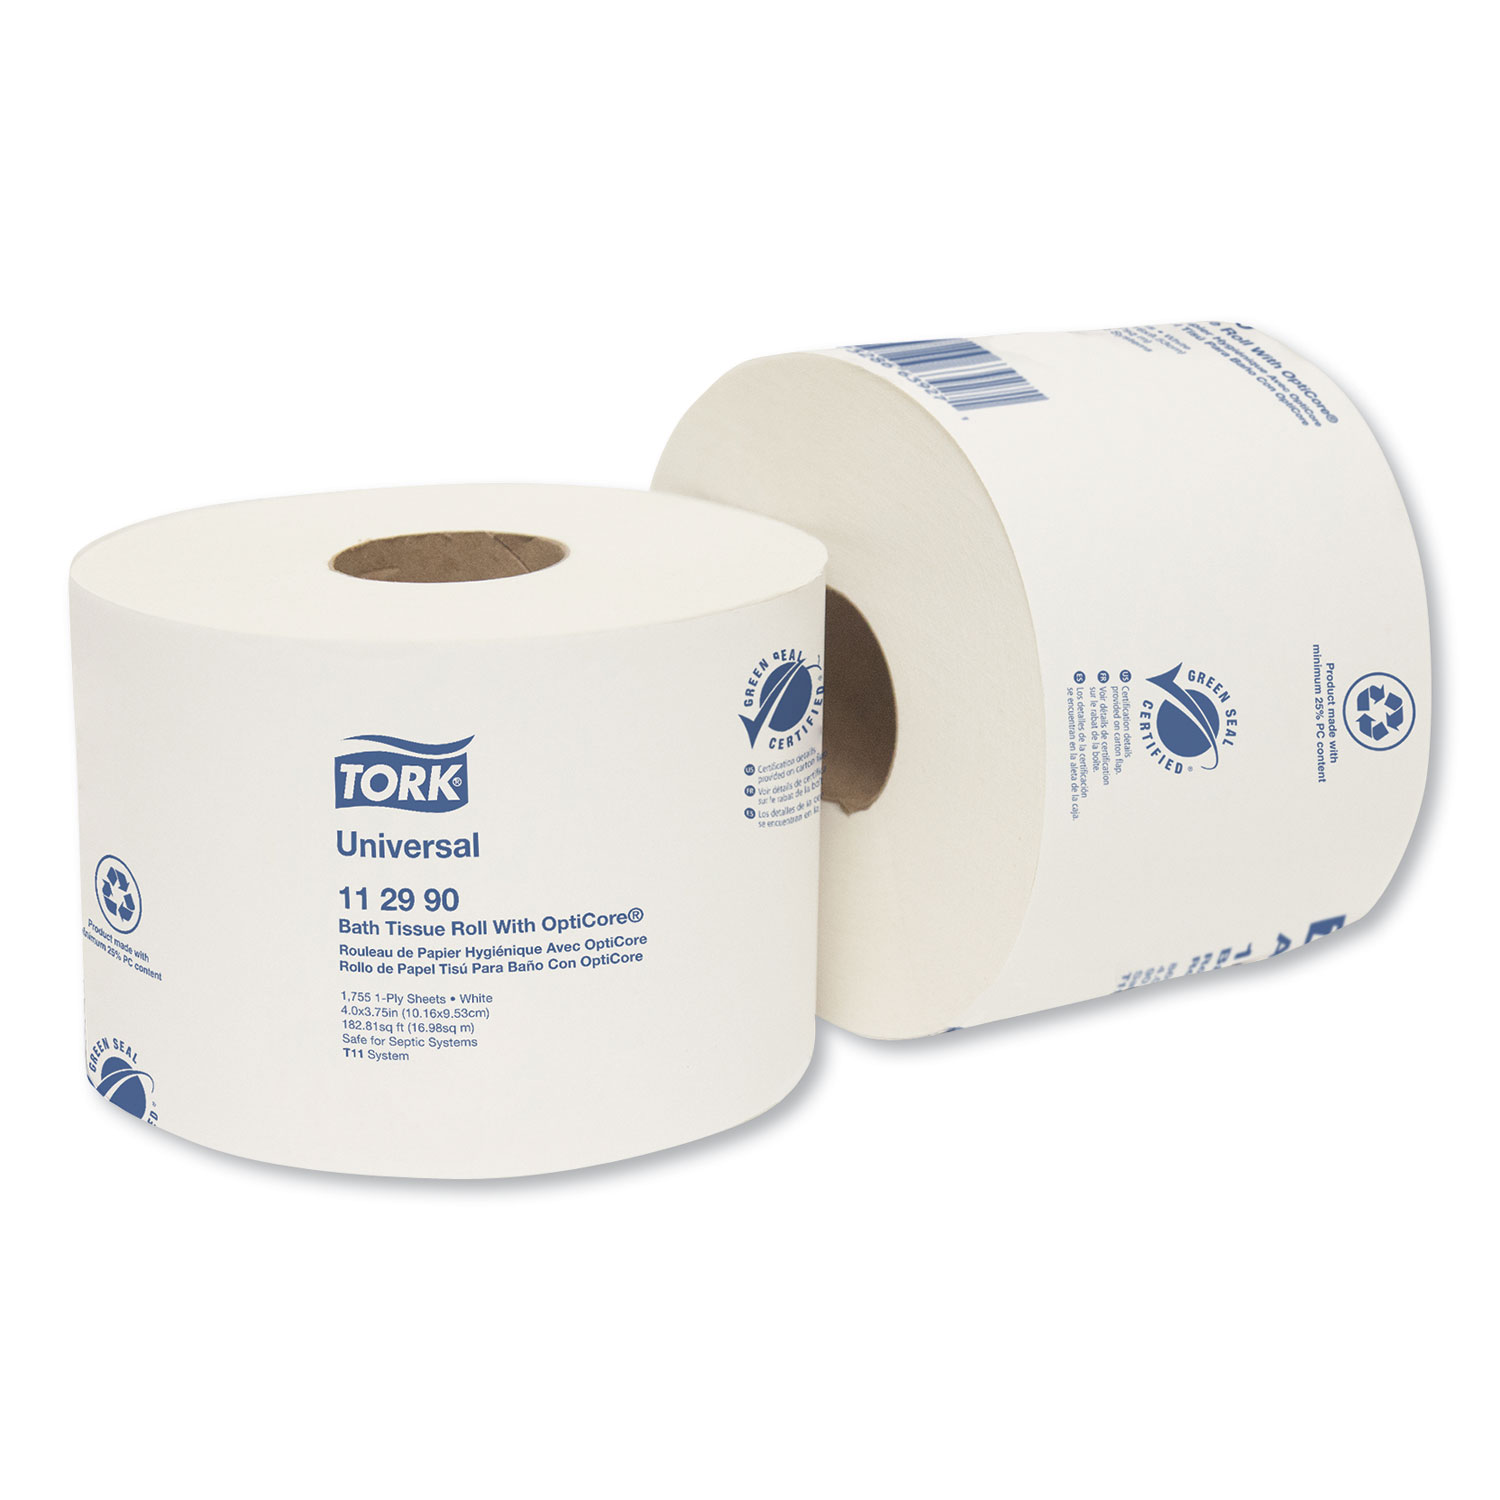  Tork 112990 Universal Bath Tissue Roll with OptiCore, Septic Safe, 1-Ply, White, 1755 Sheets/Roll, 36/Carton (TRK112990) 